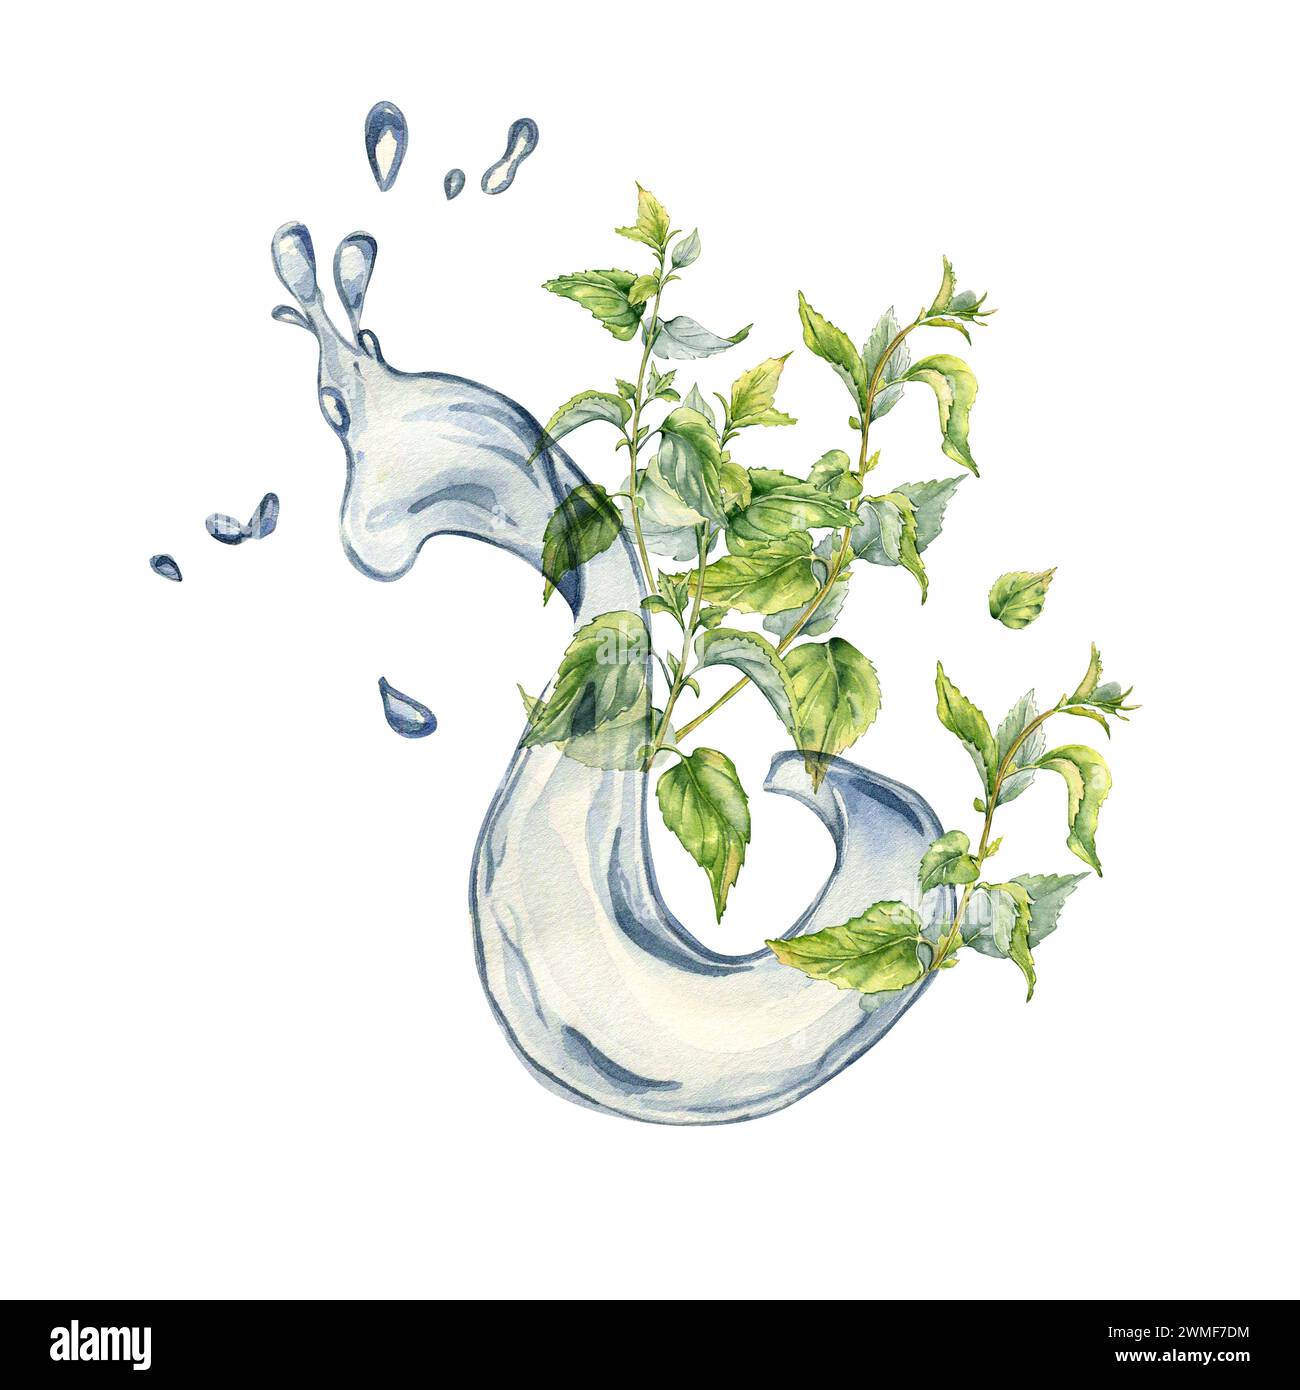 Bush of nettles in water splash. Watercolor illustration of the herbal plant Urticaria dioica. Water wave and green leaf, stinging plant hand drawn. E Stock Photo